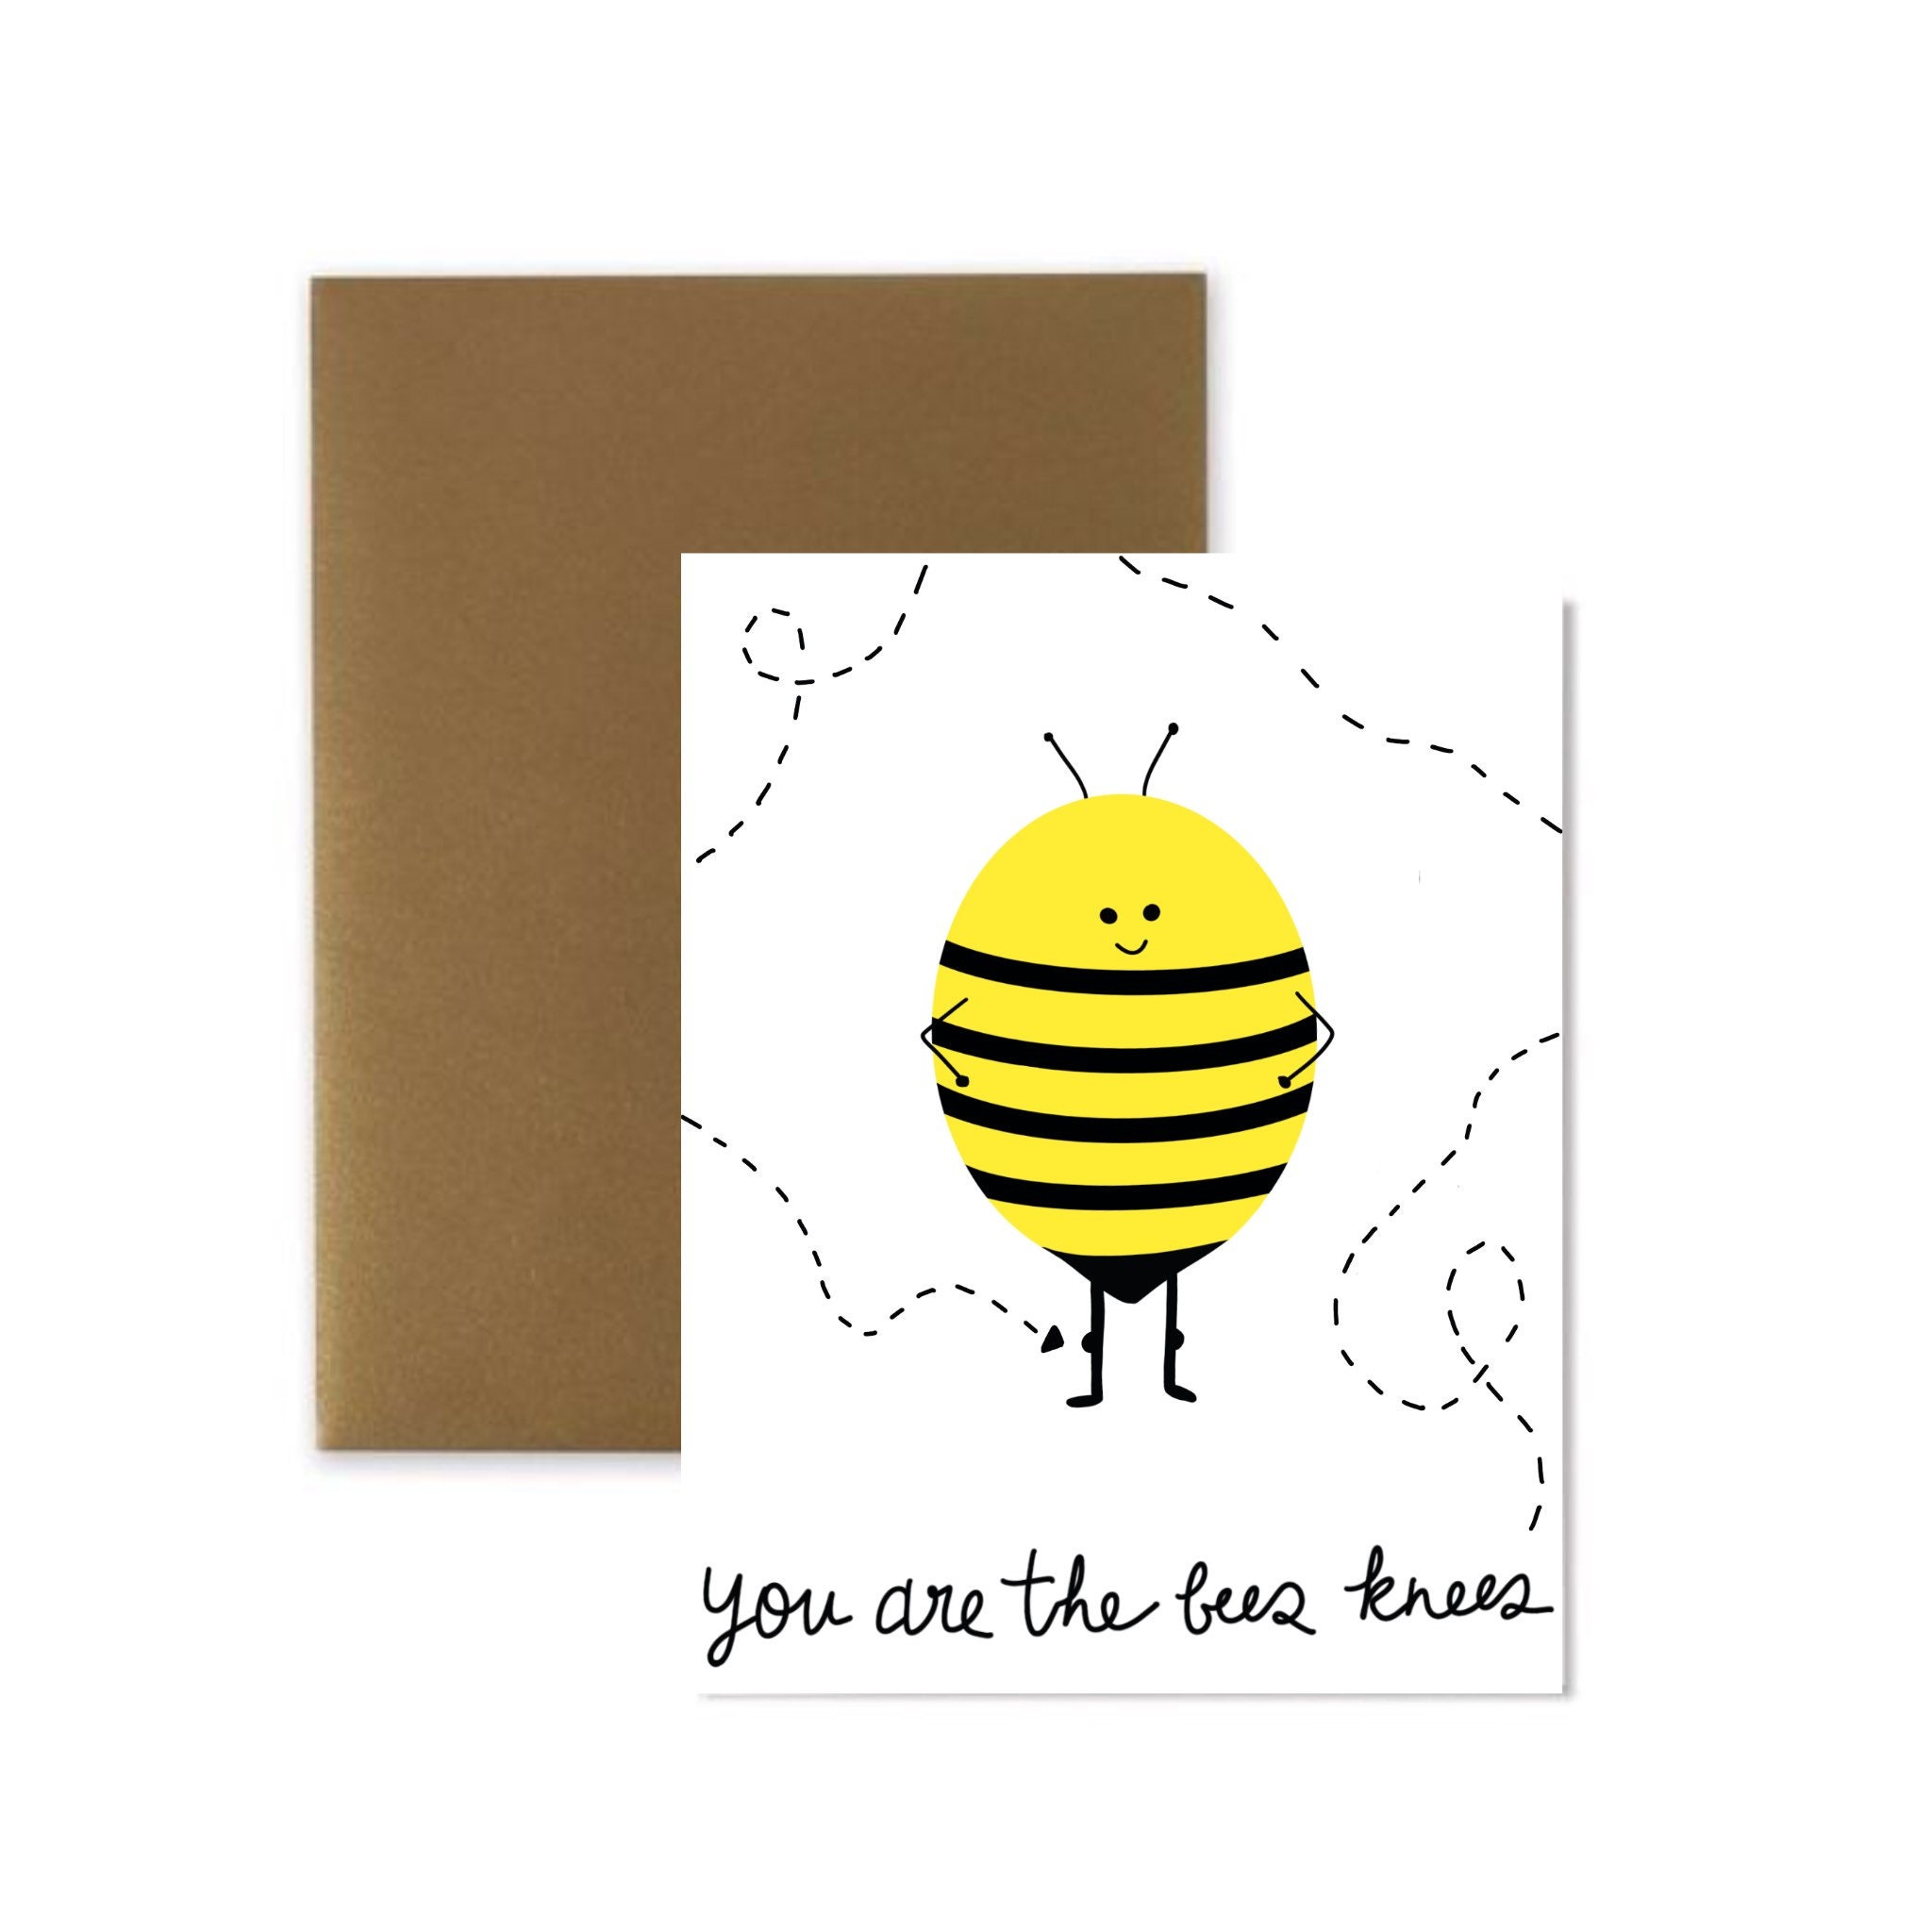 Gardens Grow Best from Seeds of Love Blank Card - The Bee's Knees